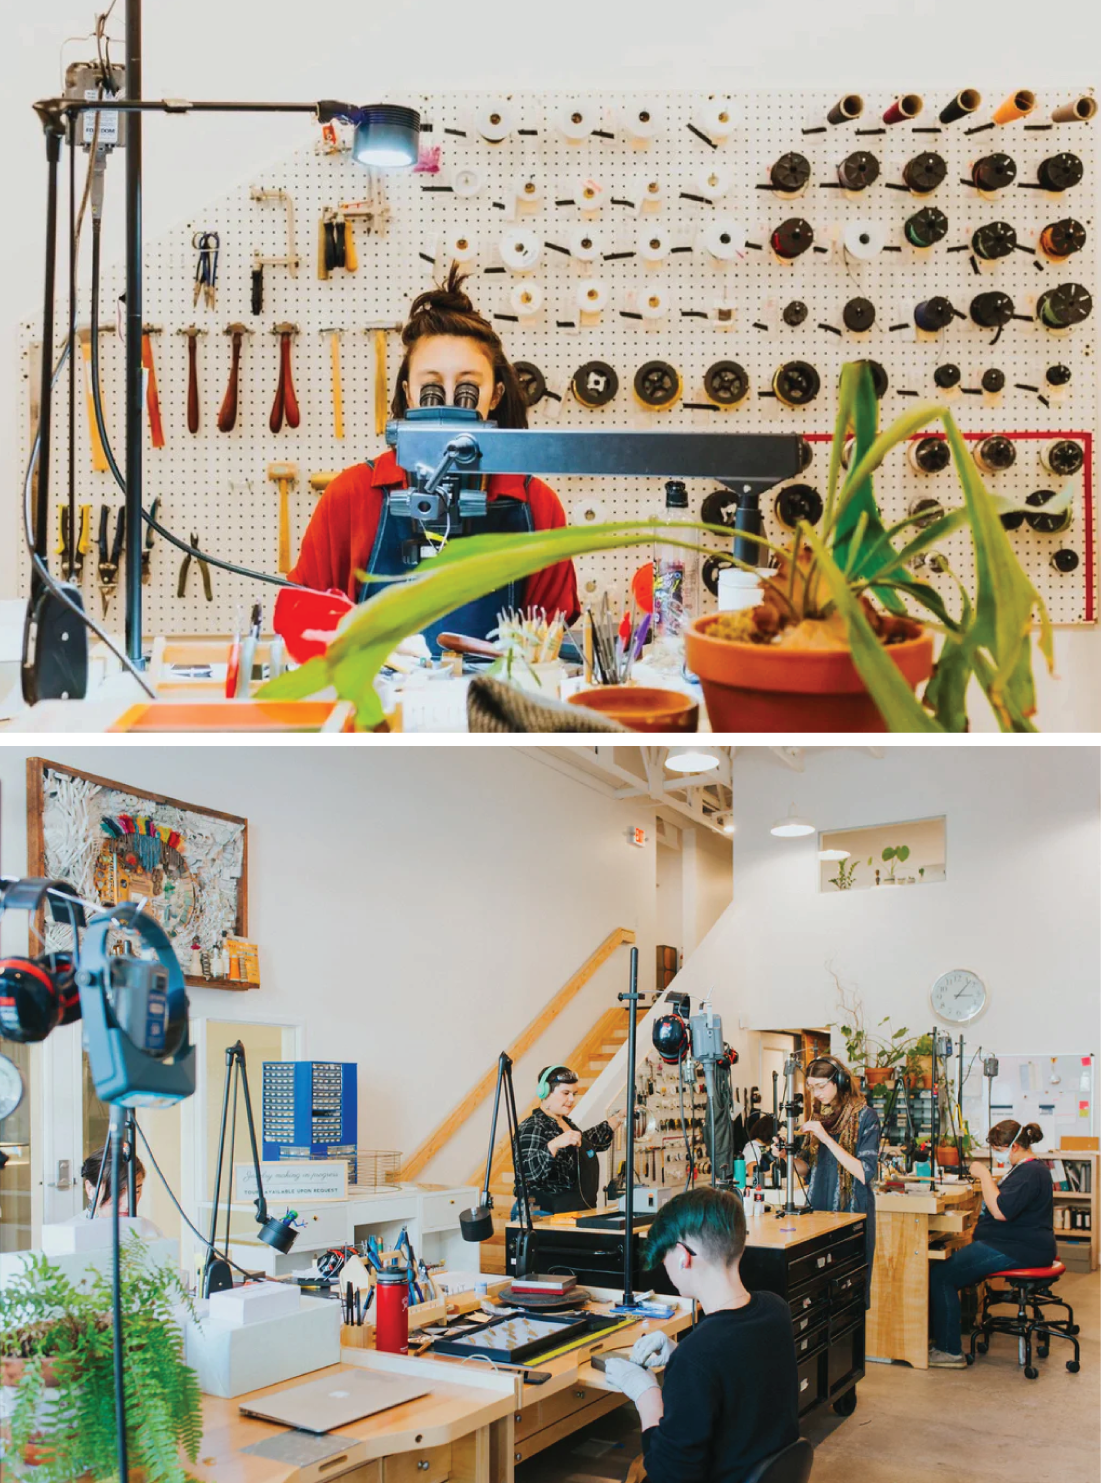 The creation of handmade jewelry at Betsy and Iya in Portland, Oregon